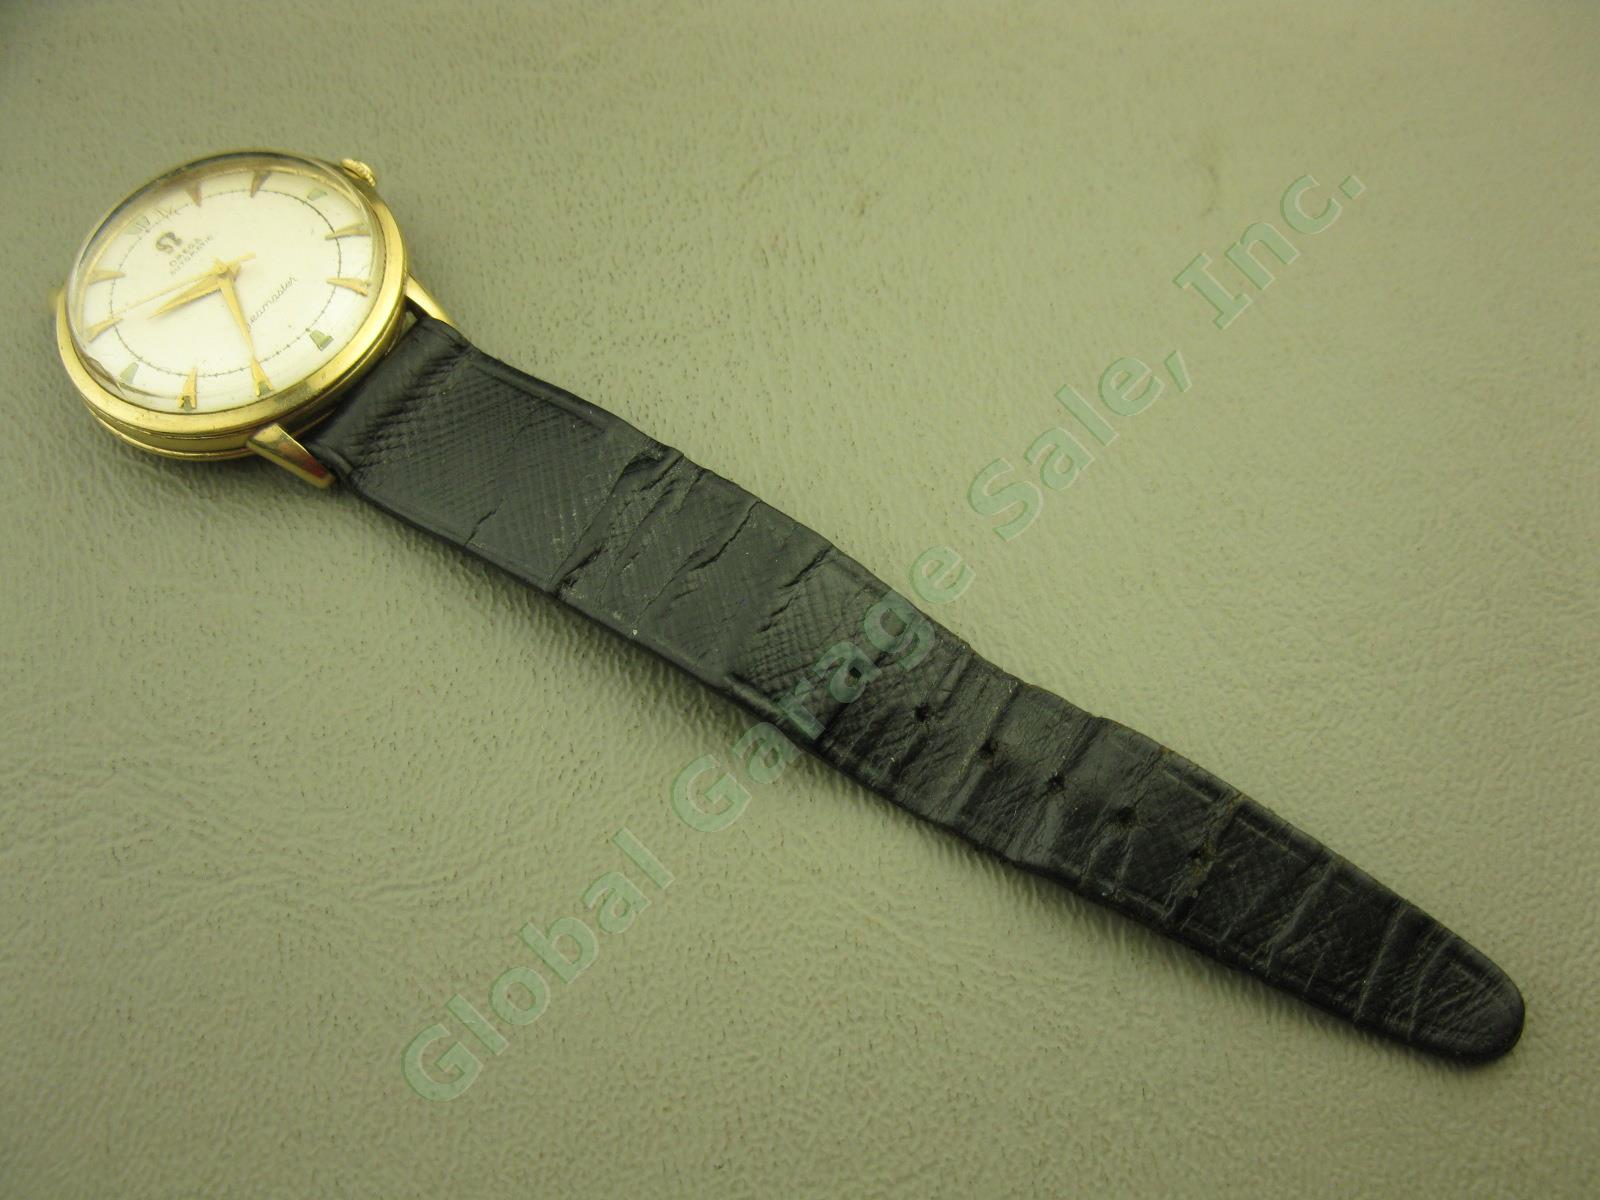 Vtg 1948 Omega Seamaster 14k Gold Automatic Bumper Swiss Watch Serial # 11118734 2